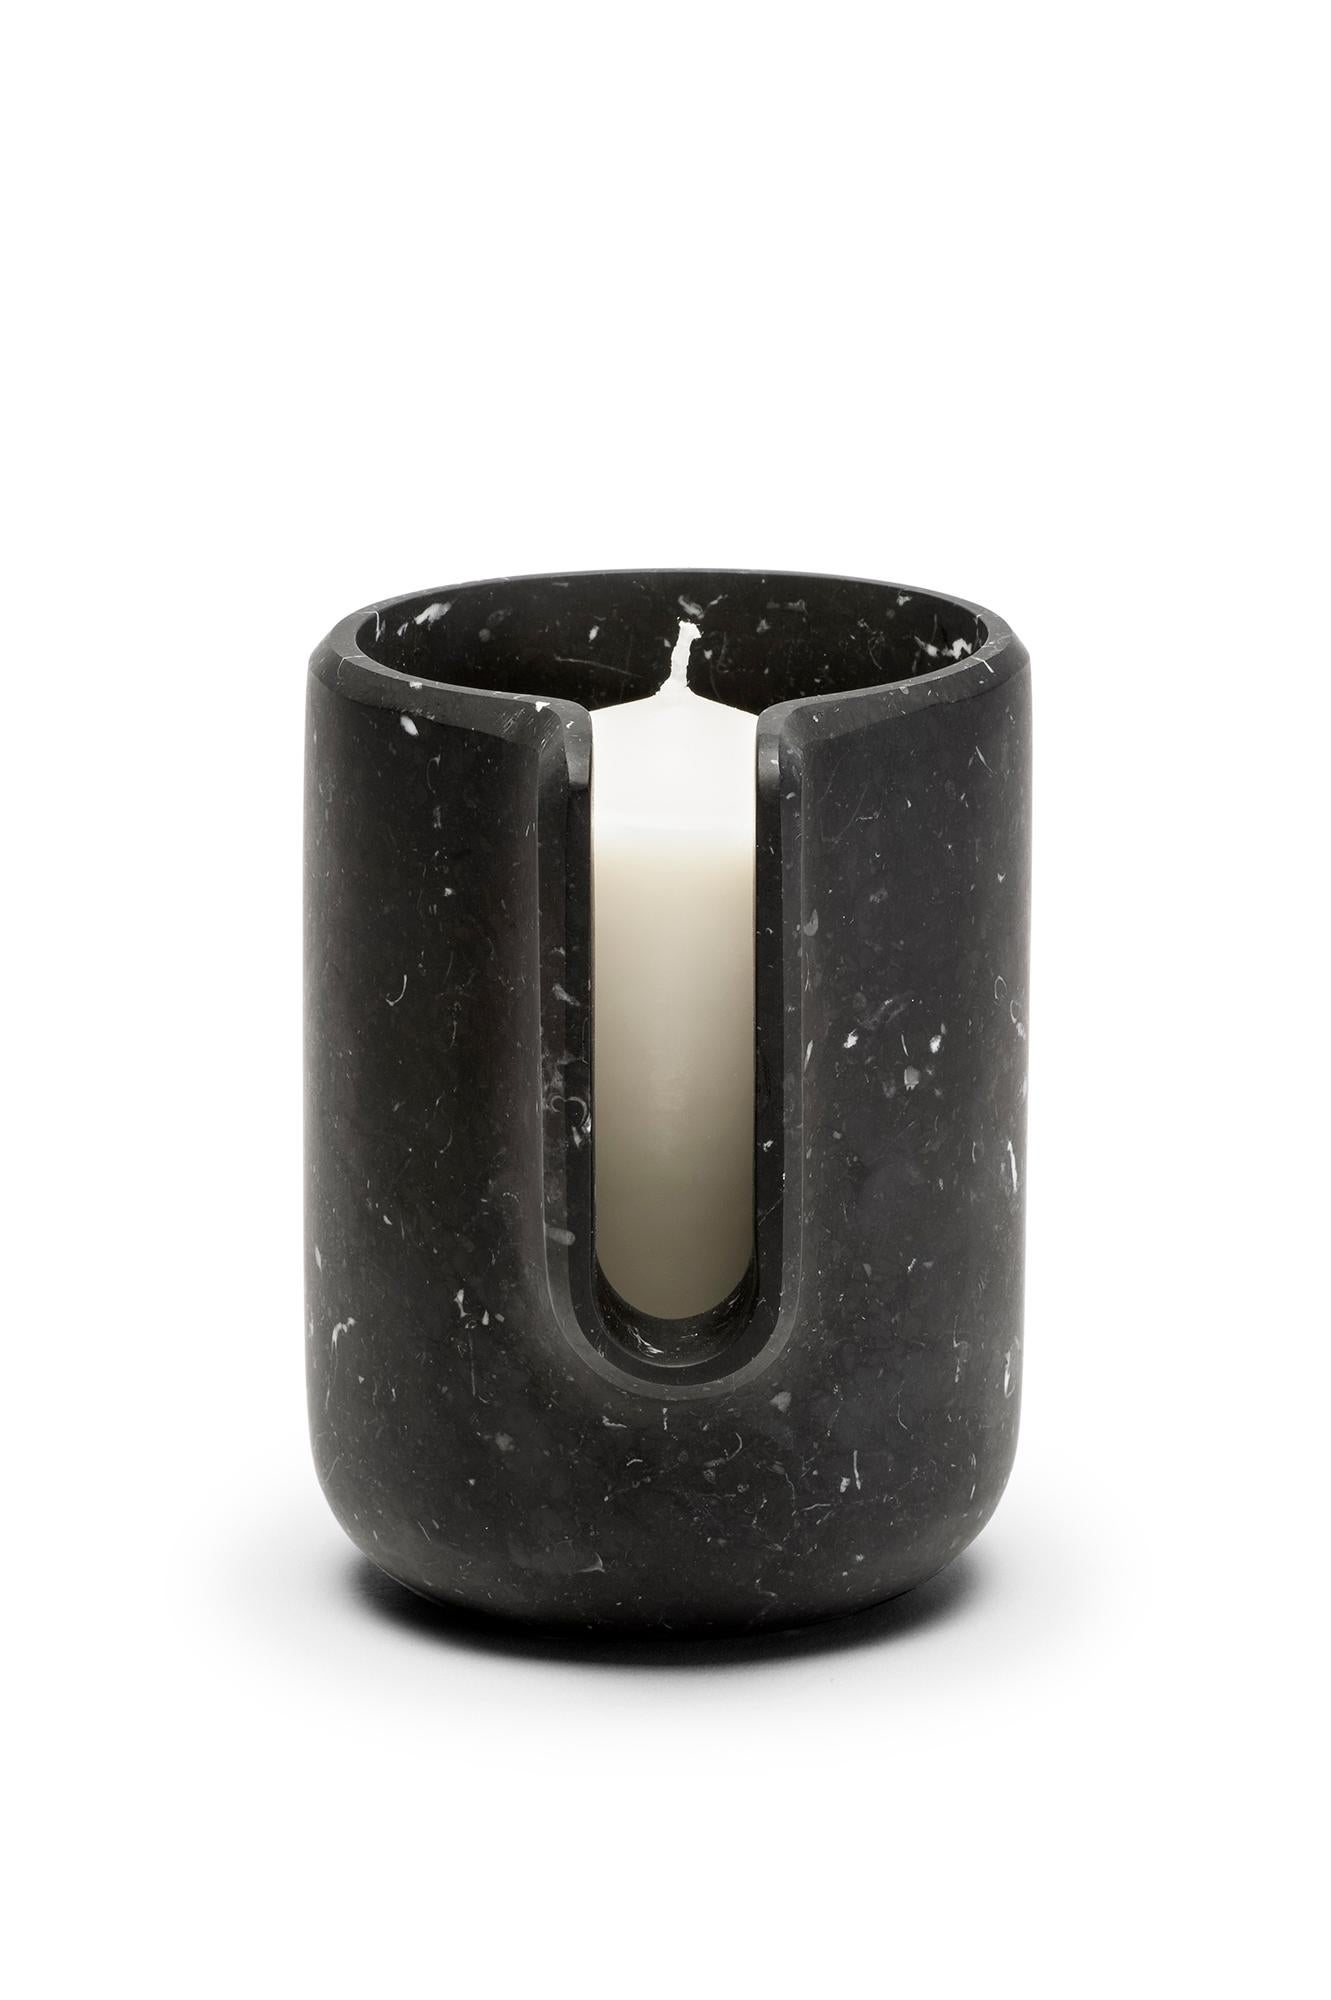 Kouki candleholder is made by hand from blocks of the purest arabescato and marquinia marble.
The candle is contained in a marble cylinder which presents a central cut to facilitate its lighting. Its chamfered edges and its polished surfaces are